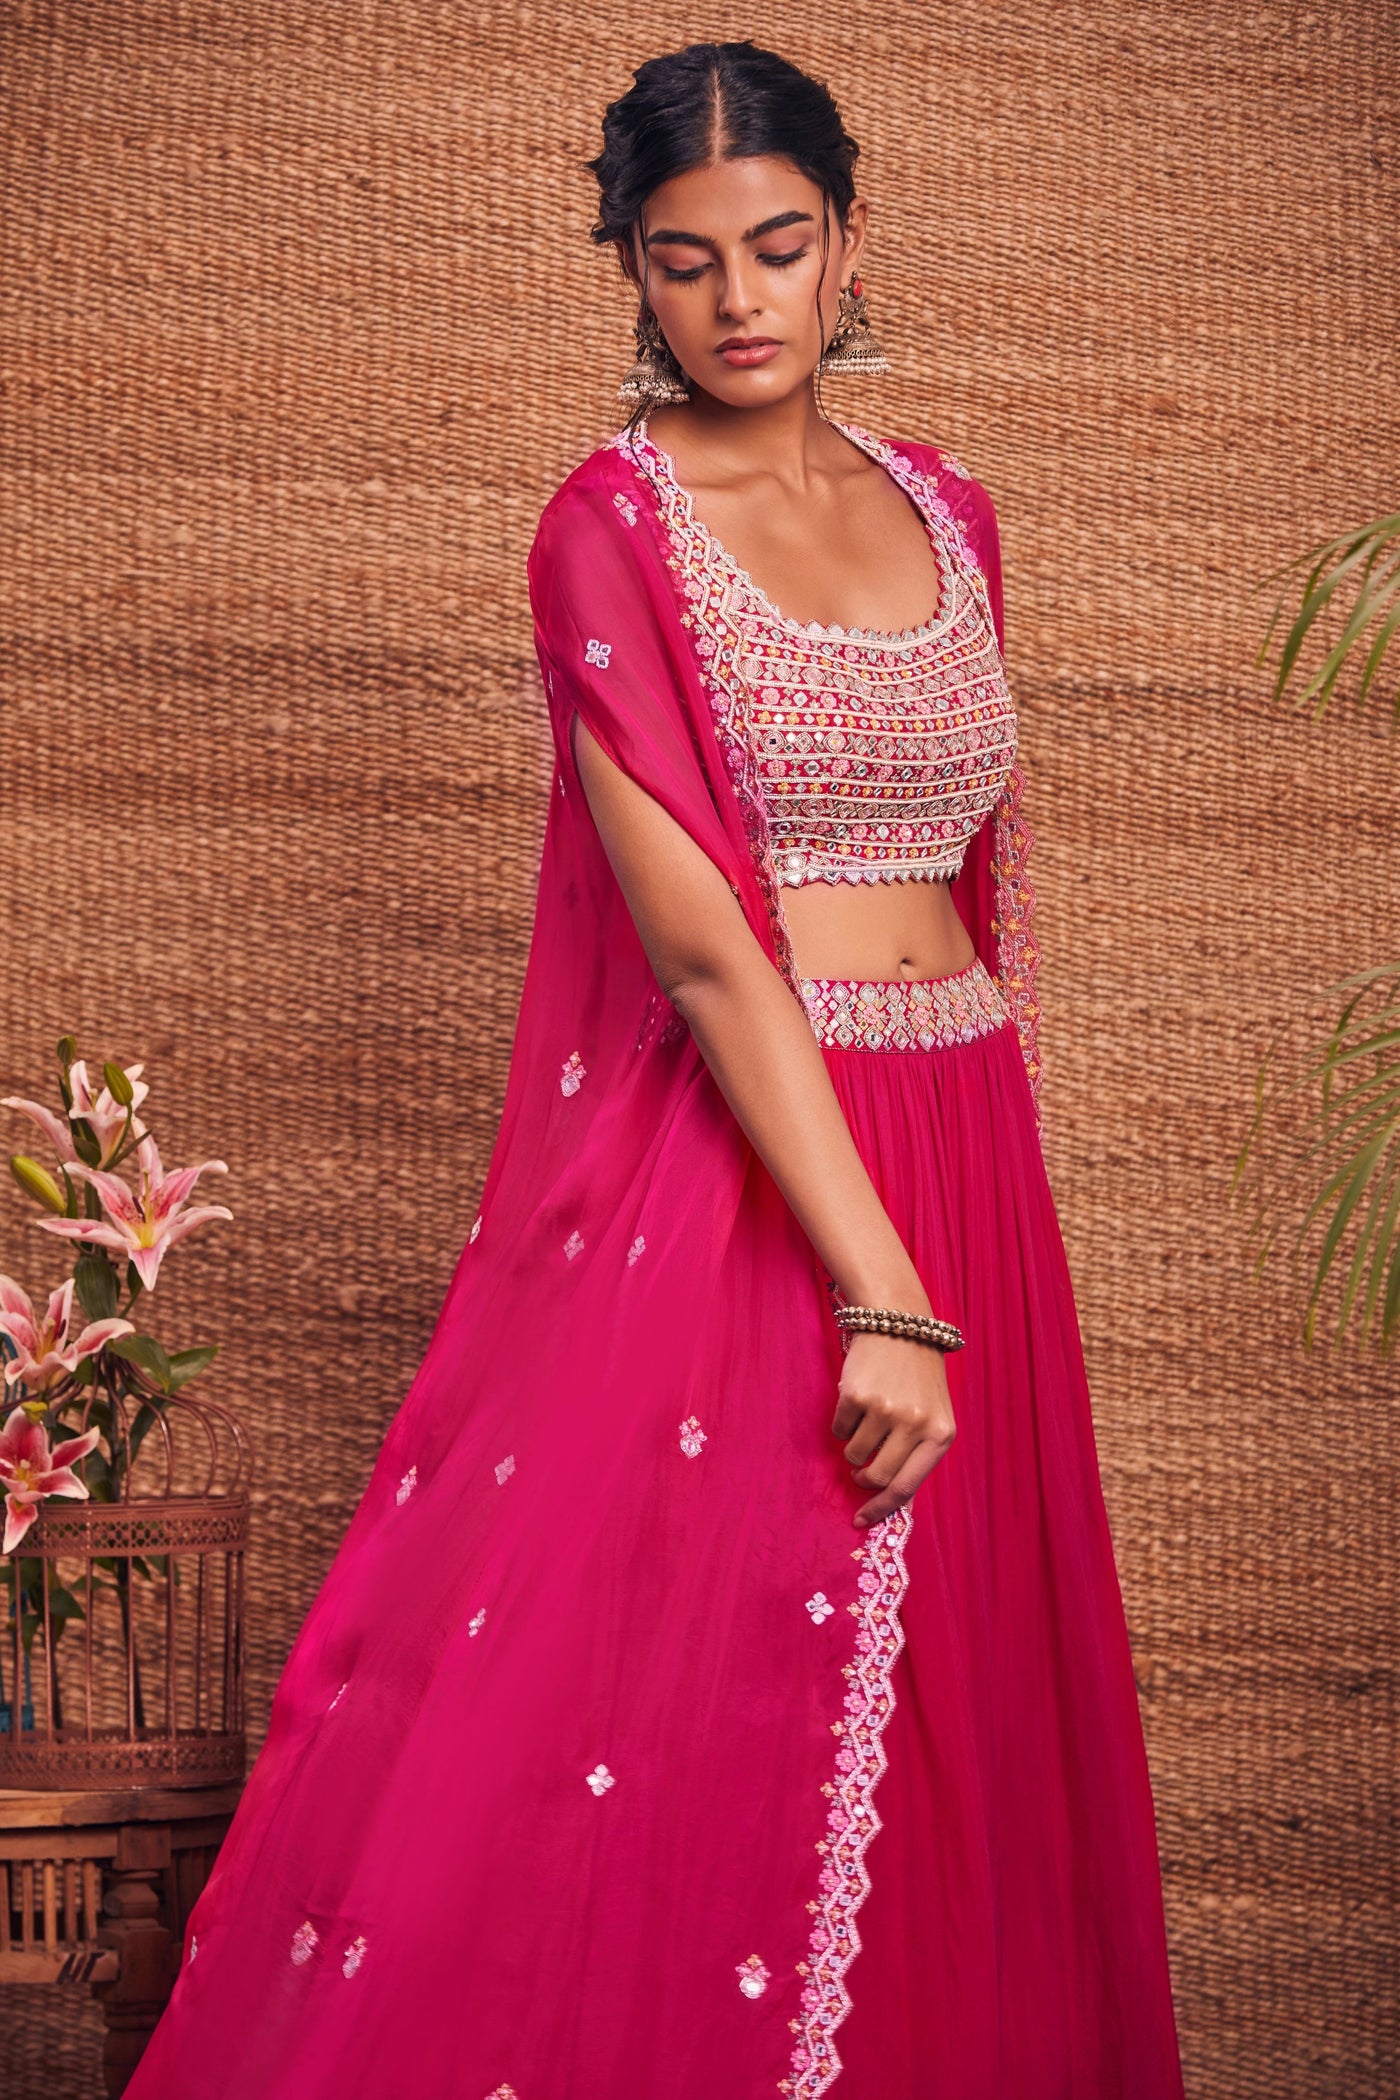 Fuchsia Pink Cape Skirt Set - Indian Clothing in Denver, CO, Aurora, CO, Boulder, CO, Fort Collins, CO, Colorado Springs, CO, Parker, CO, Highlands Ranch, CO, Cherry Creek, CO, Centennial, CO, and Longmont, CO. Nationwide shipping USA - India Fashion X